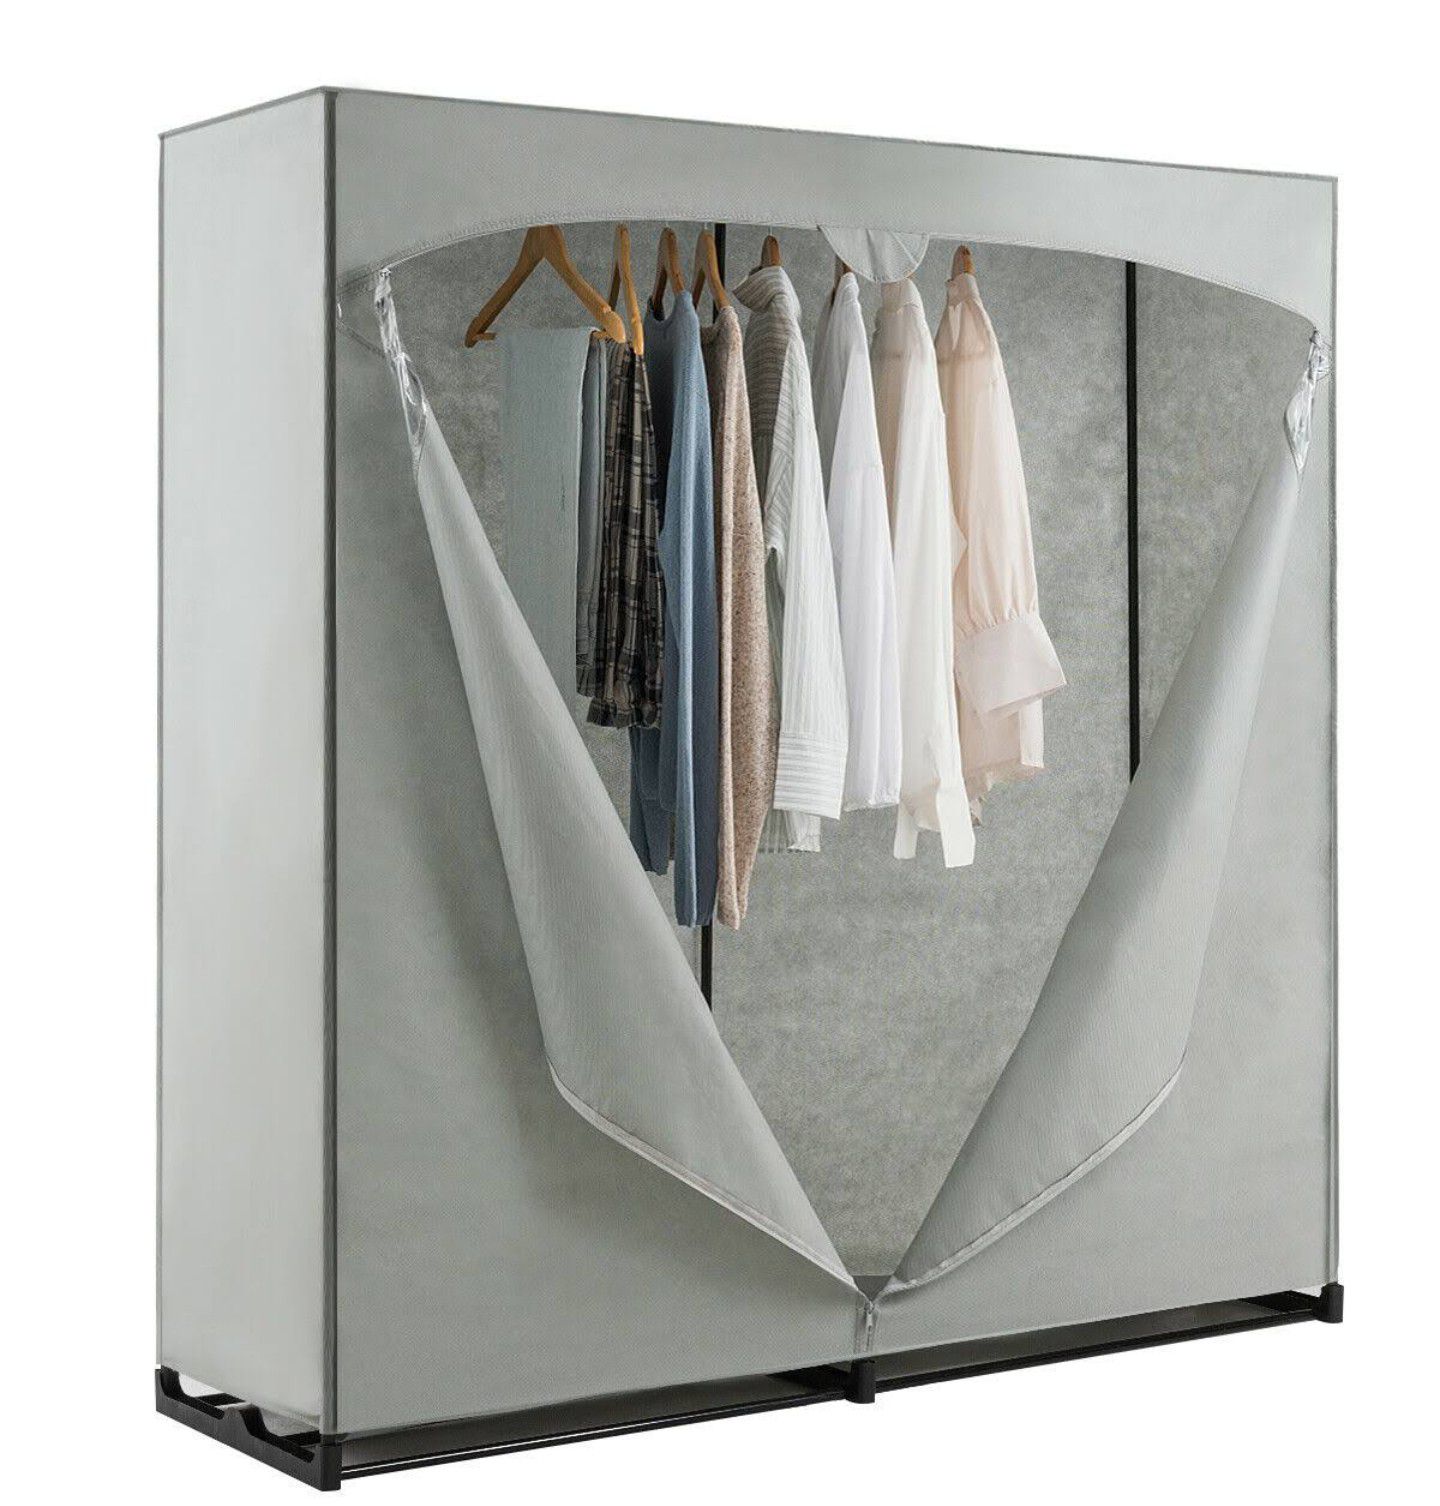 Organizer Closet with Hanging Rack size: 60” x 19.5’’ x 64’’ (L x W x H)Color: Grey Main material: pp, iron, non-woven fabric PVC